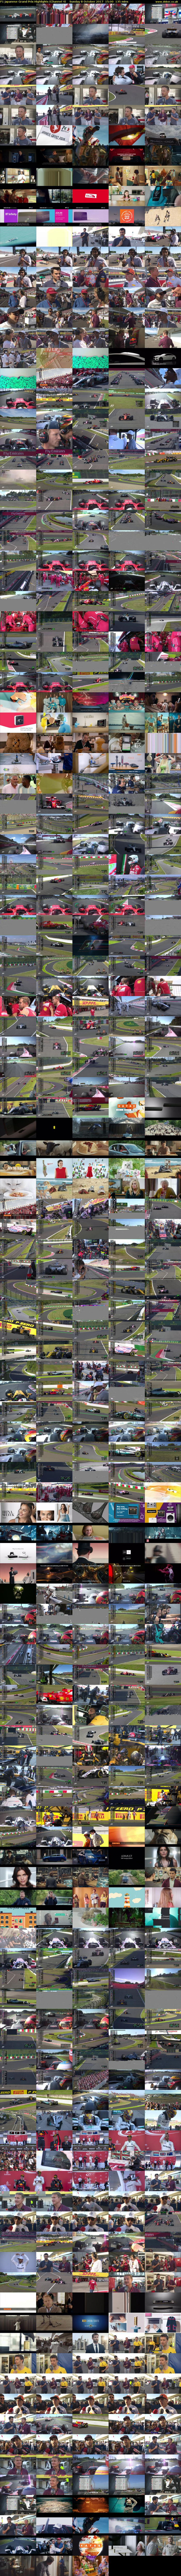 F1 Japanese Grand Prix Highlights (Channel 4) Sunday 8 October 2017 15:00 - 17:15